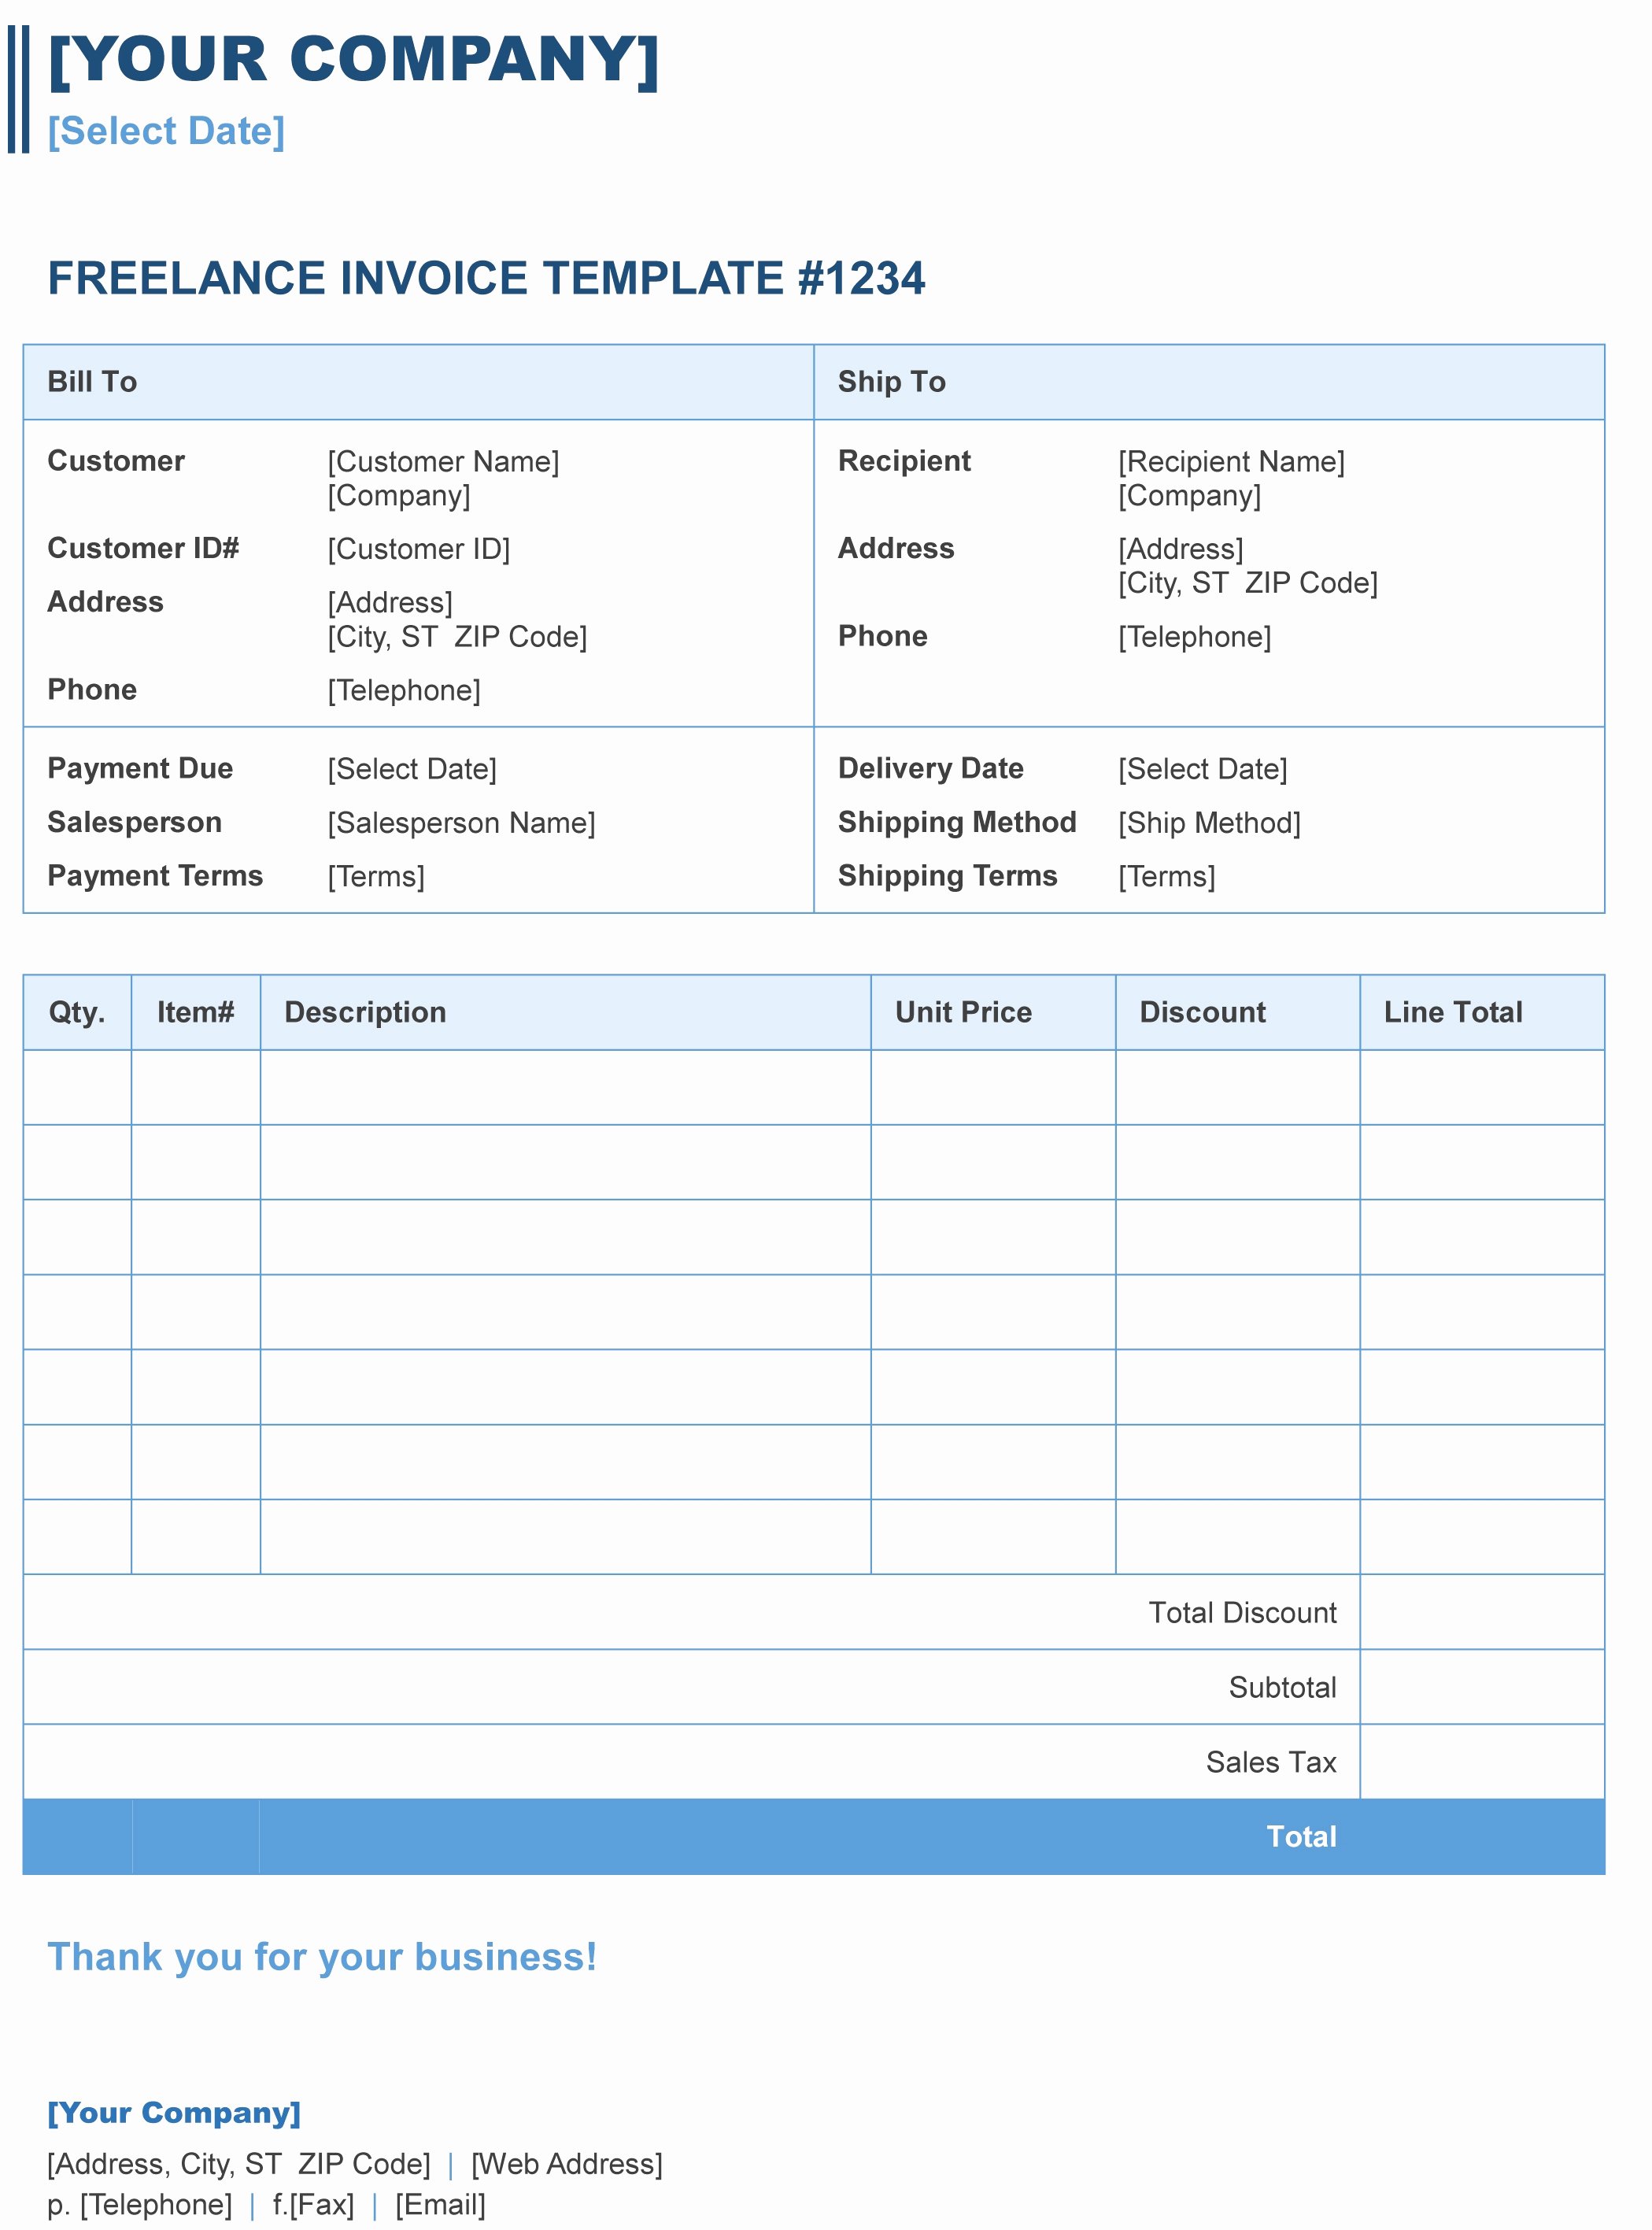 Free Excel Invoice Template Best Of Freelance Invoice Template Excel